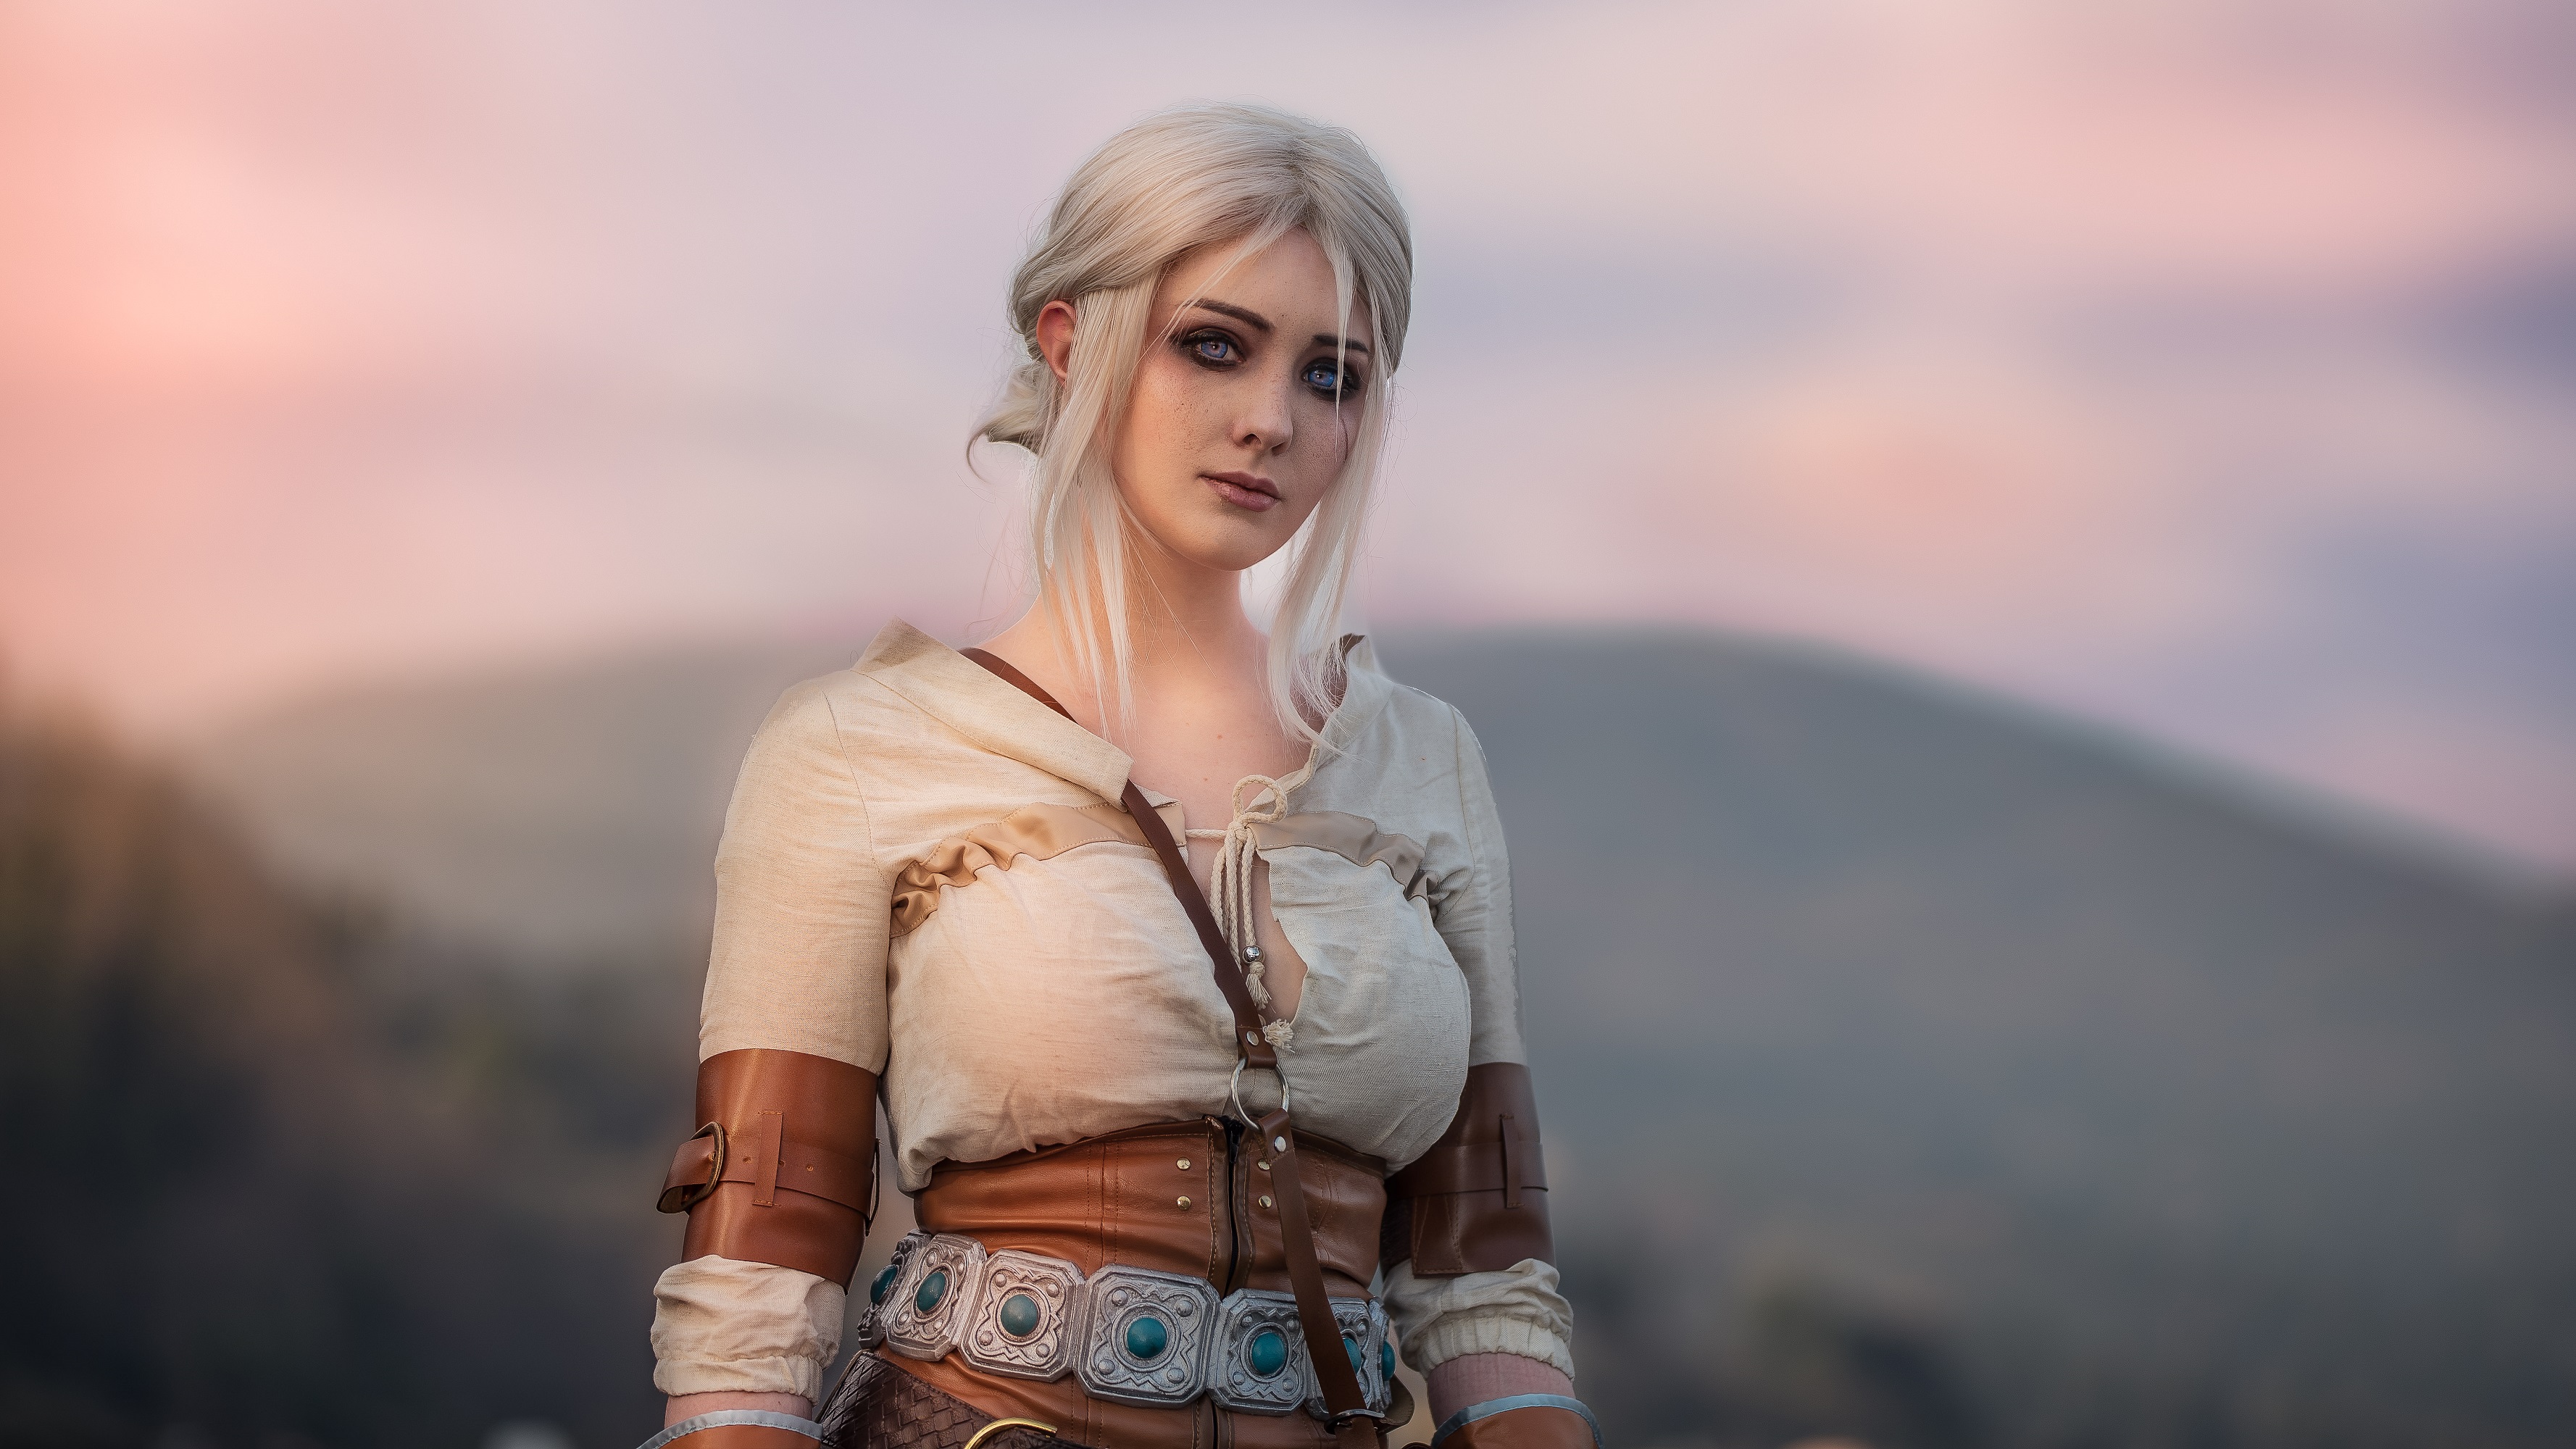 Blue Snow Women Model Looking At Viewer Outdoors Portrait Depth Of Field Cosplay Ciri The Witcher Vi 3555x2000